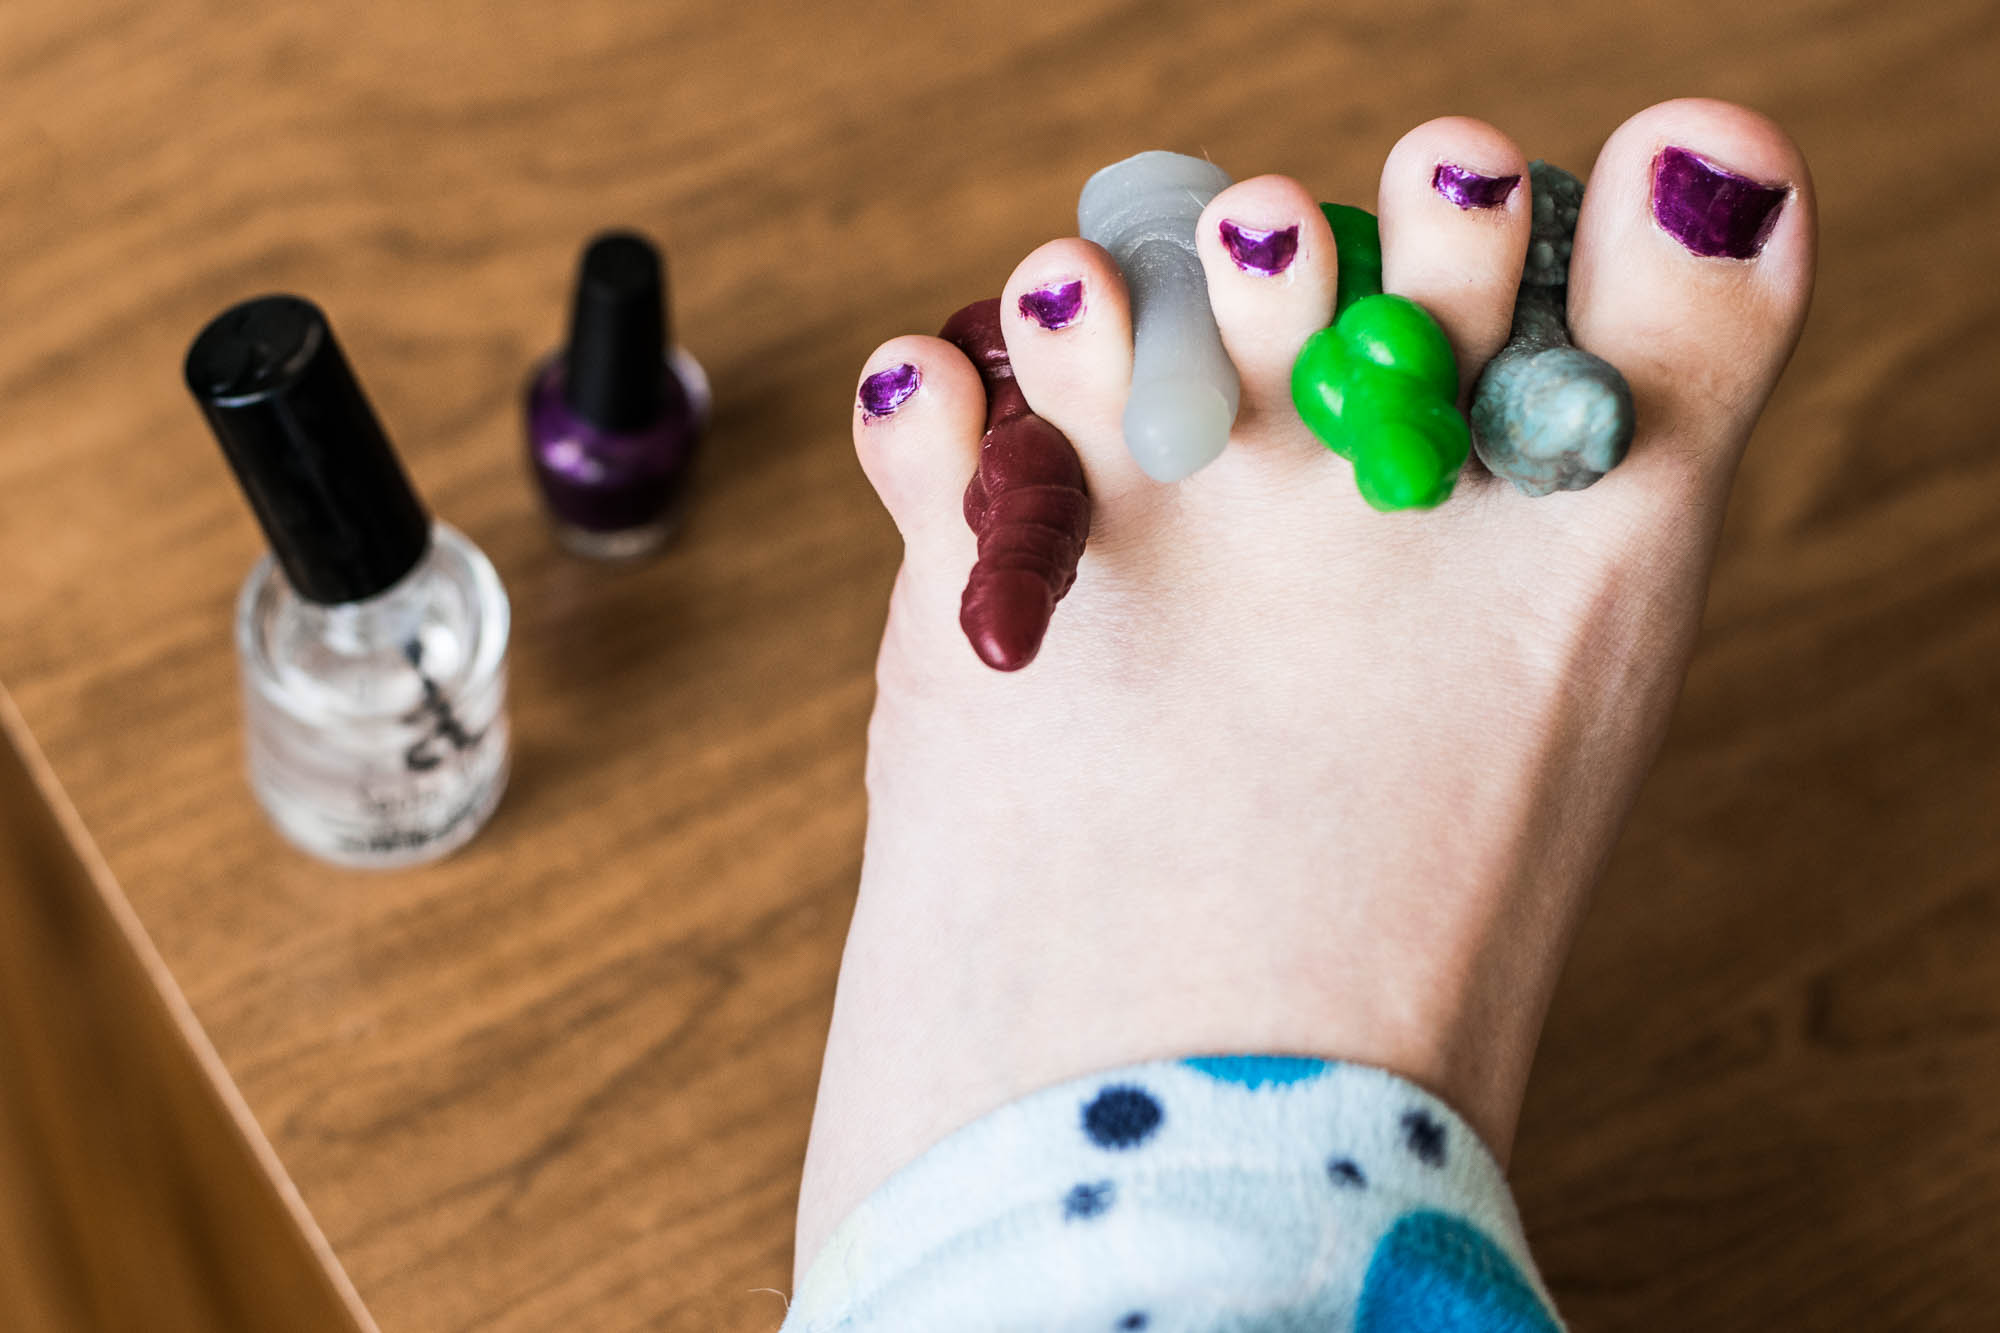 Tiny dildos work well as toe separators during pedicures.